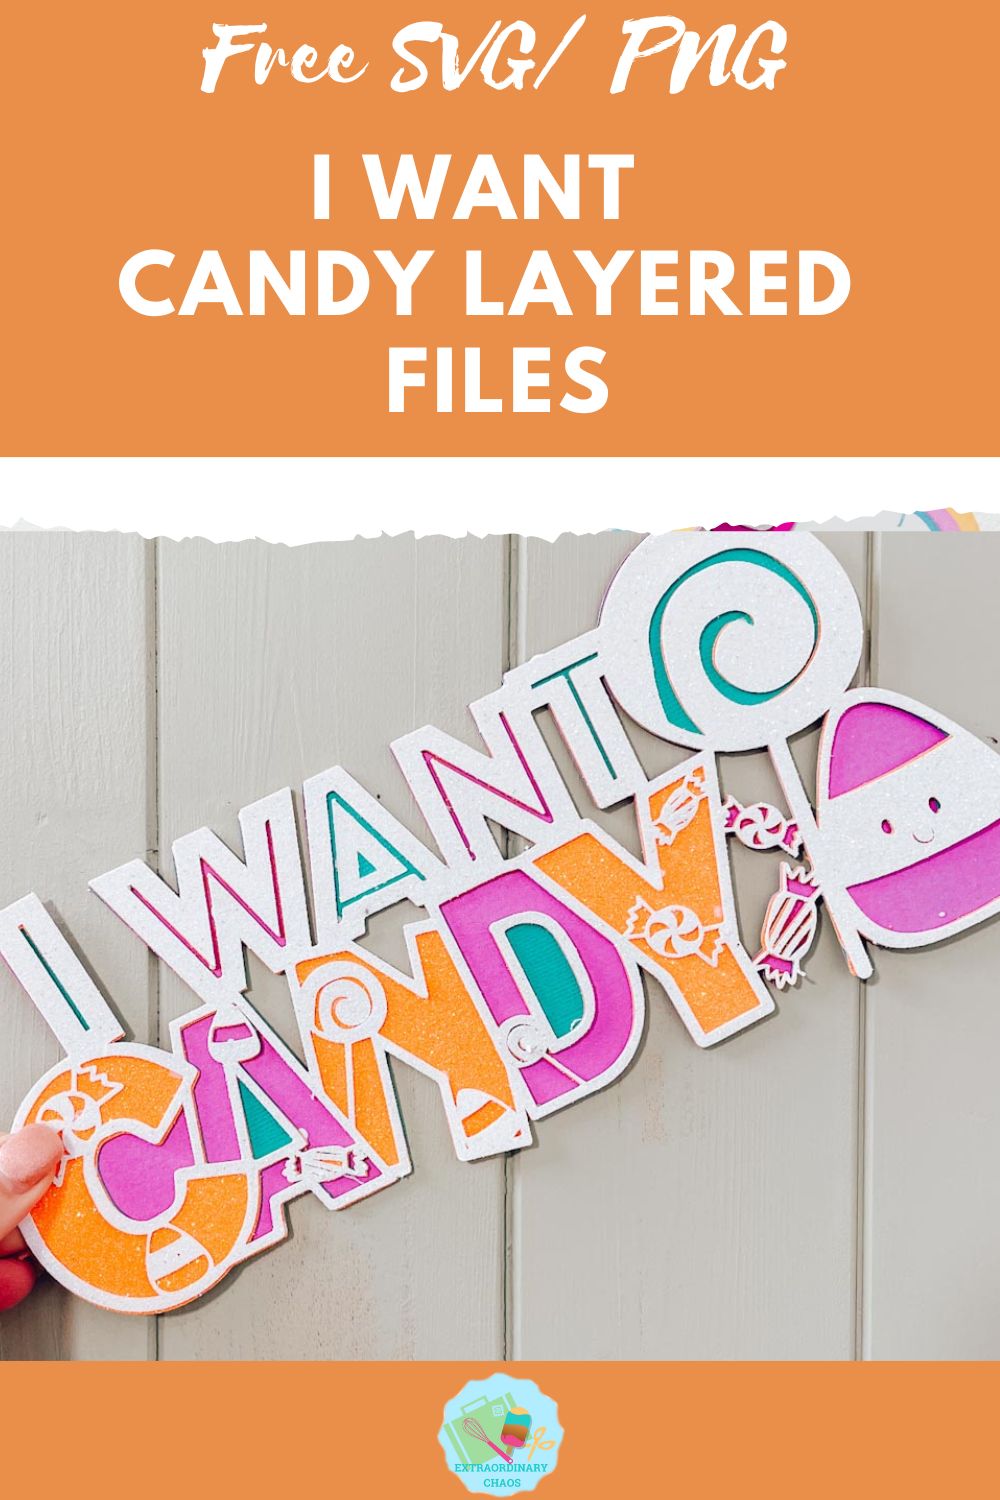 Free I Want Candy layered files SVGPNG File for Cricut, Glowforge